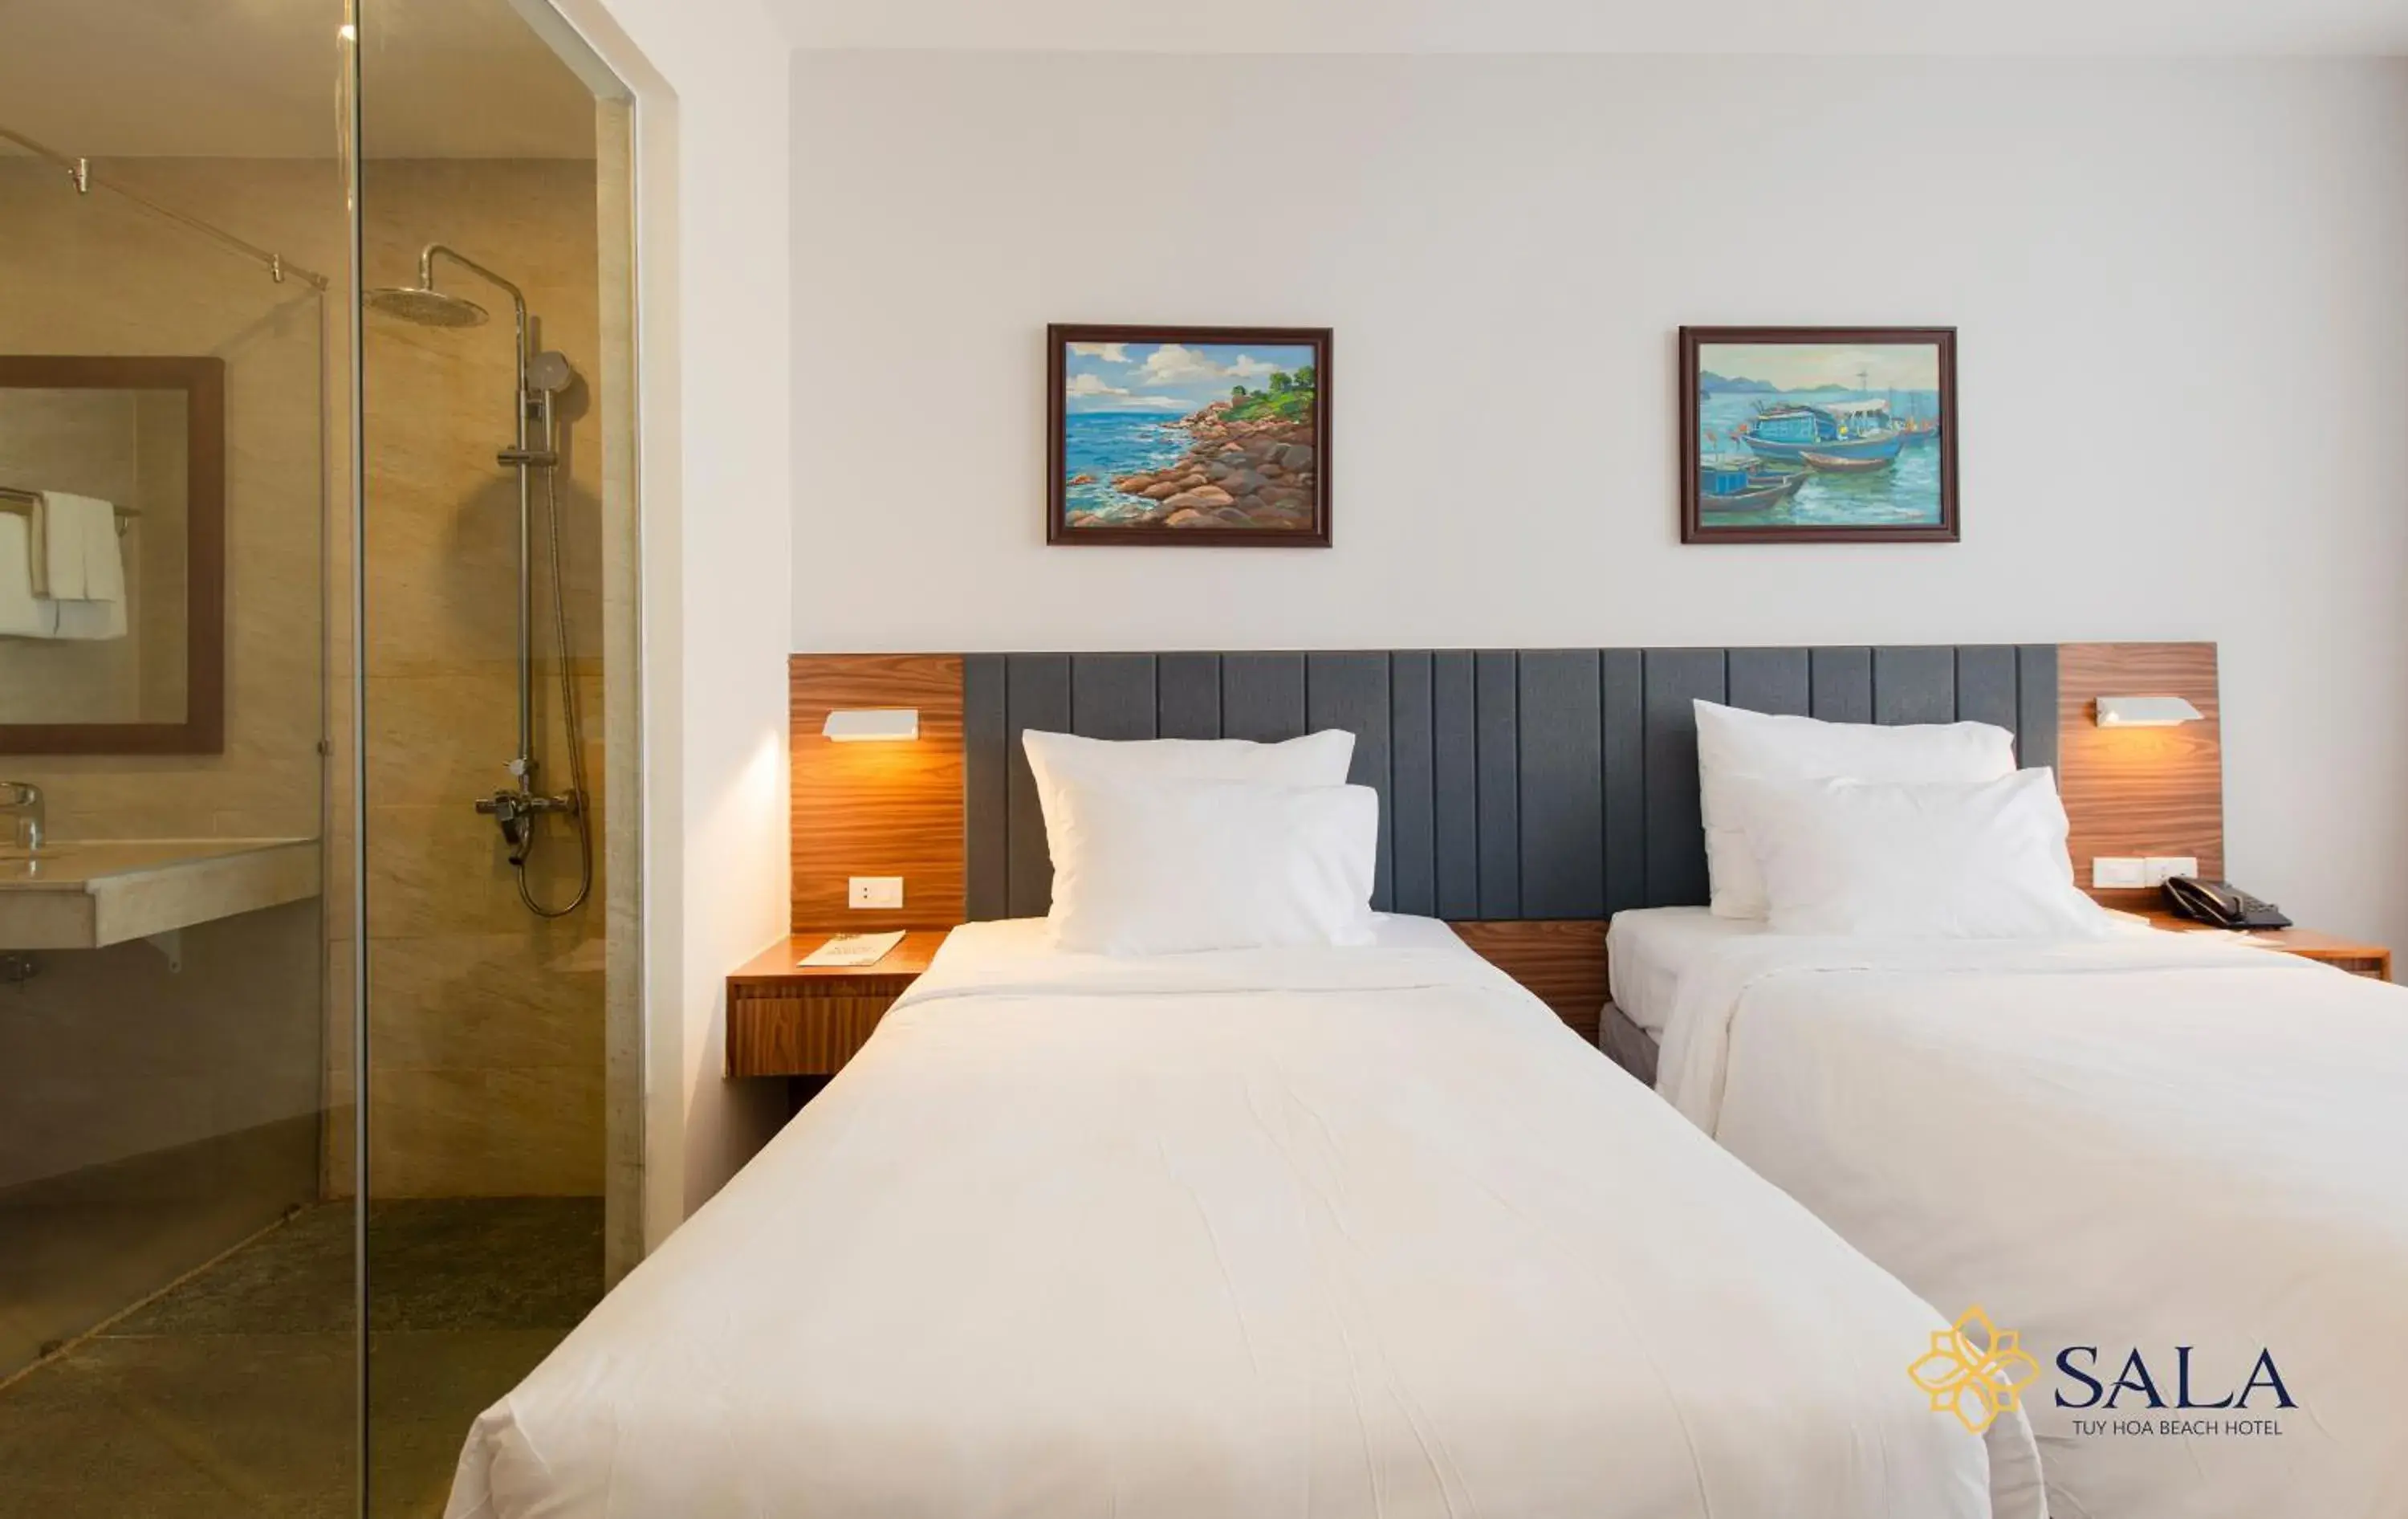 Superior Double or Twin Room with Garden View in Sala Tuy Hoa Beach Hotel